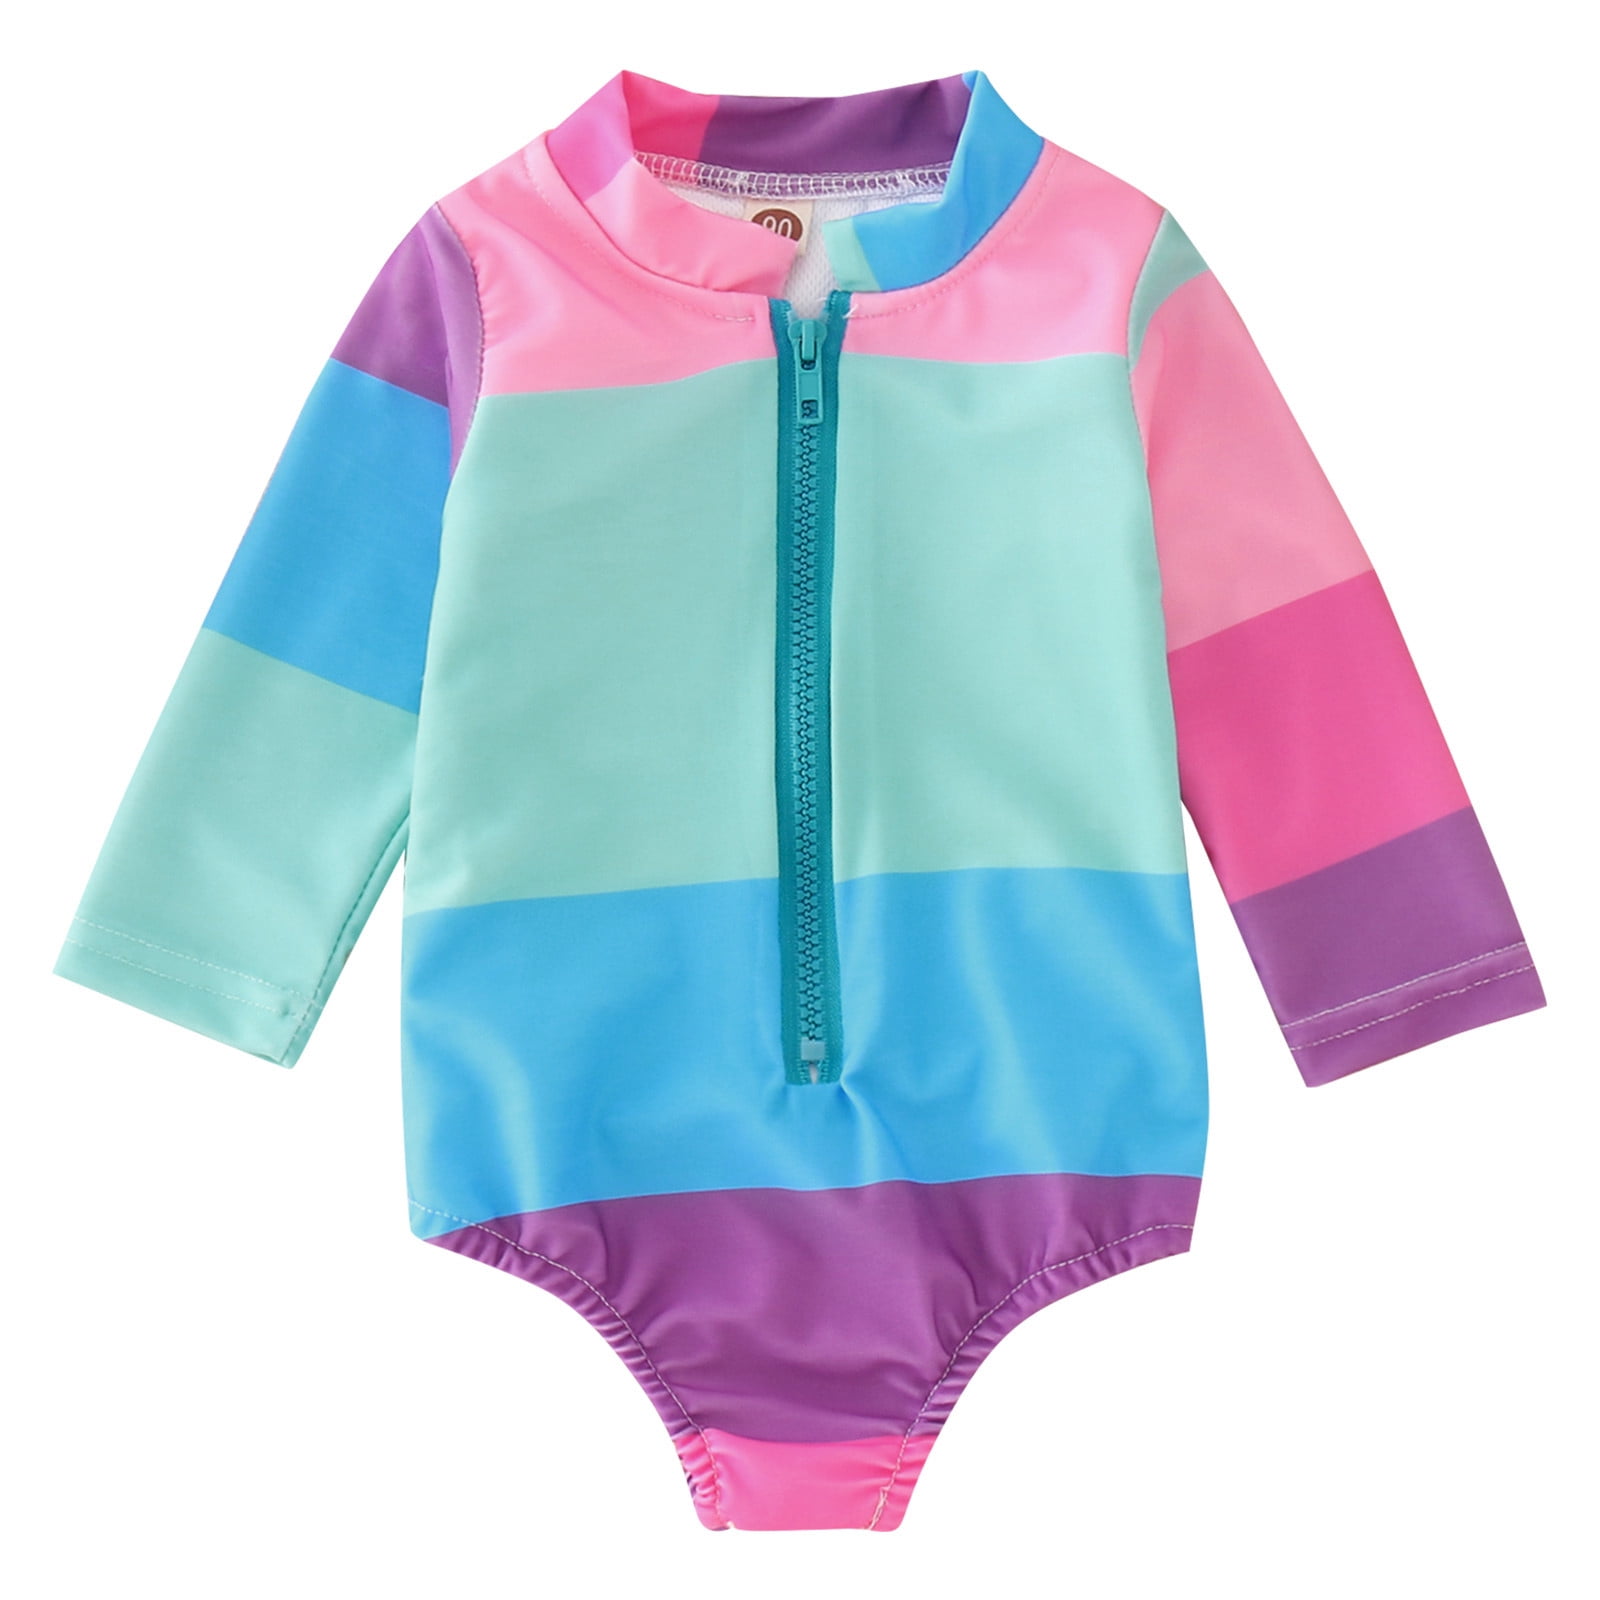 Kids Swimsuits For Girls Summer Long Sleeve Rainbow Striped Prints 1 ...